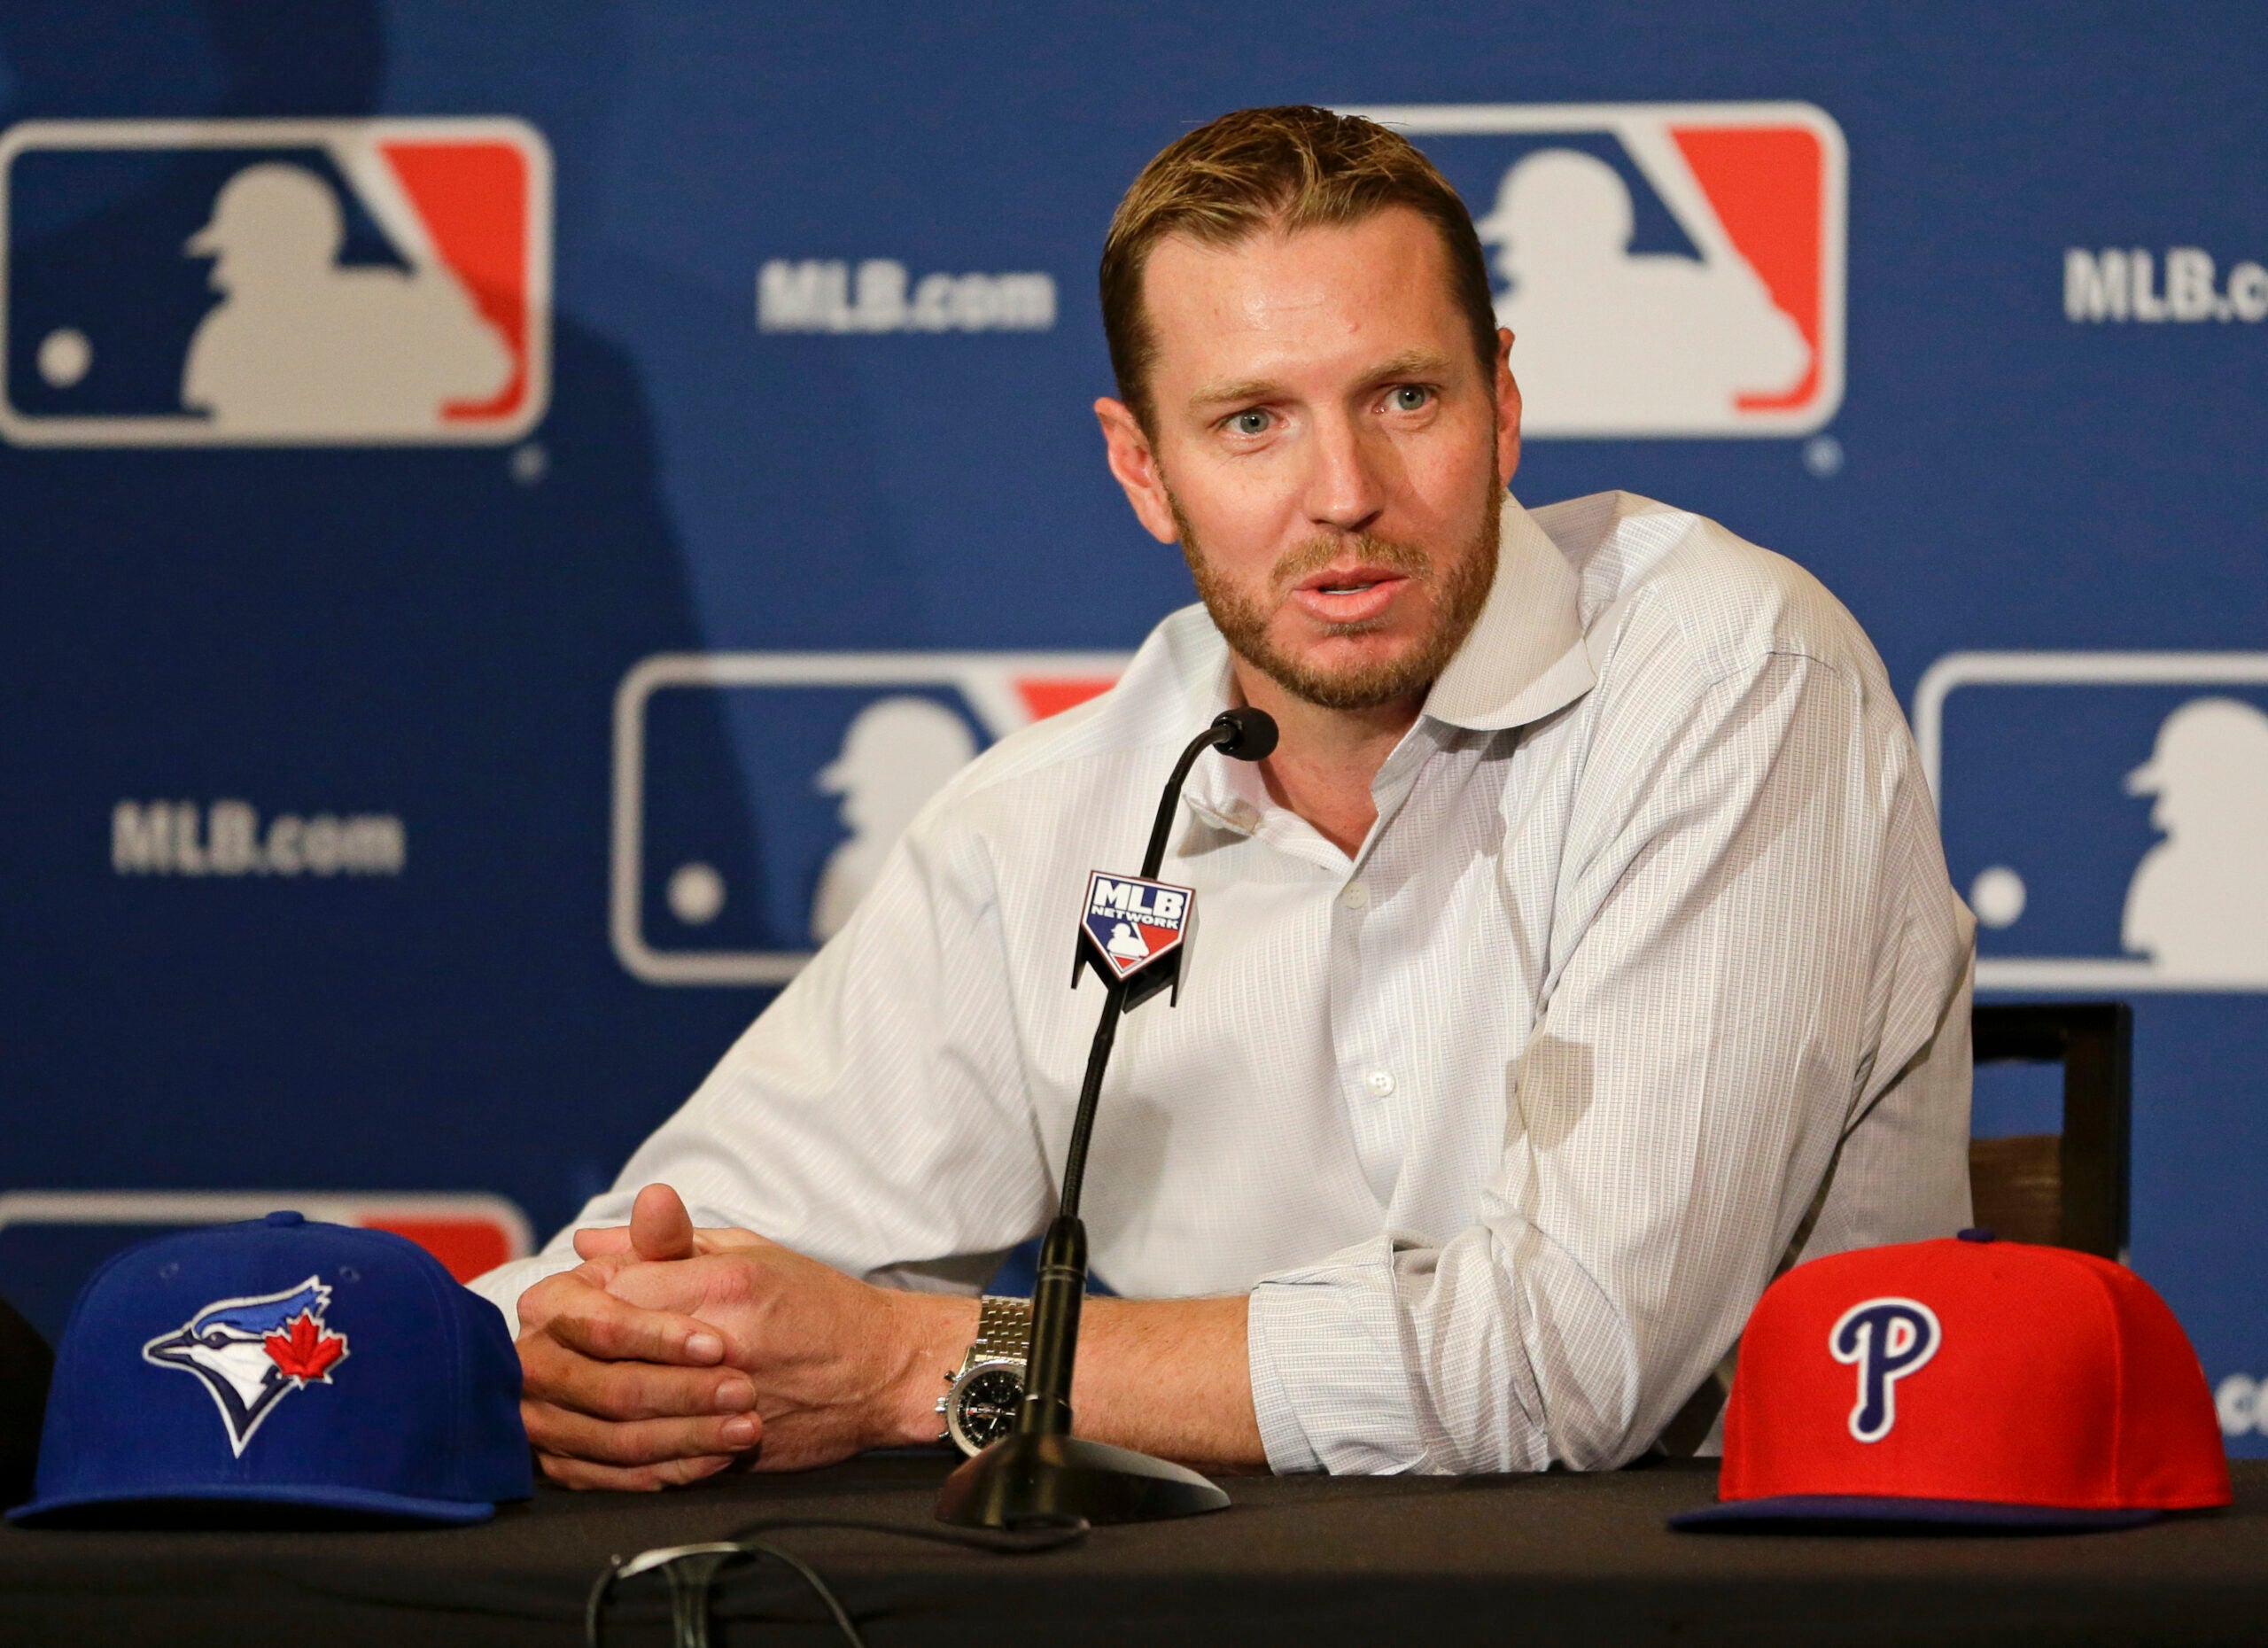 Autopsy: Roy Halladay died from blunt force trauma, had morphine